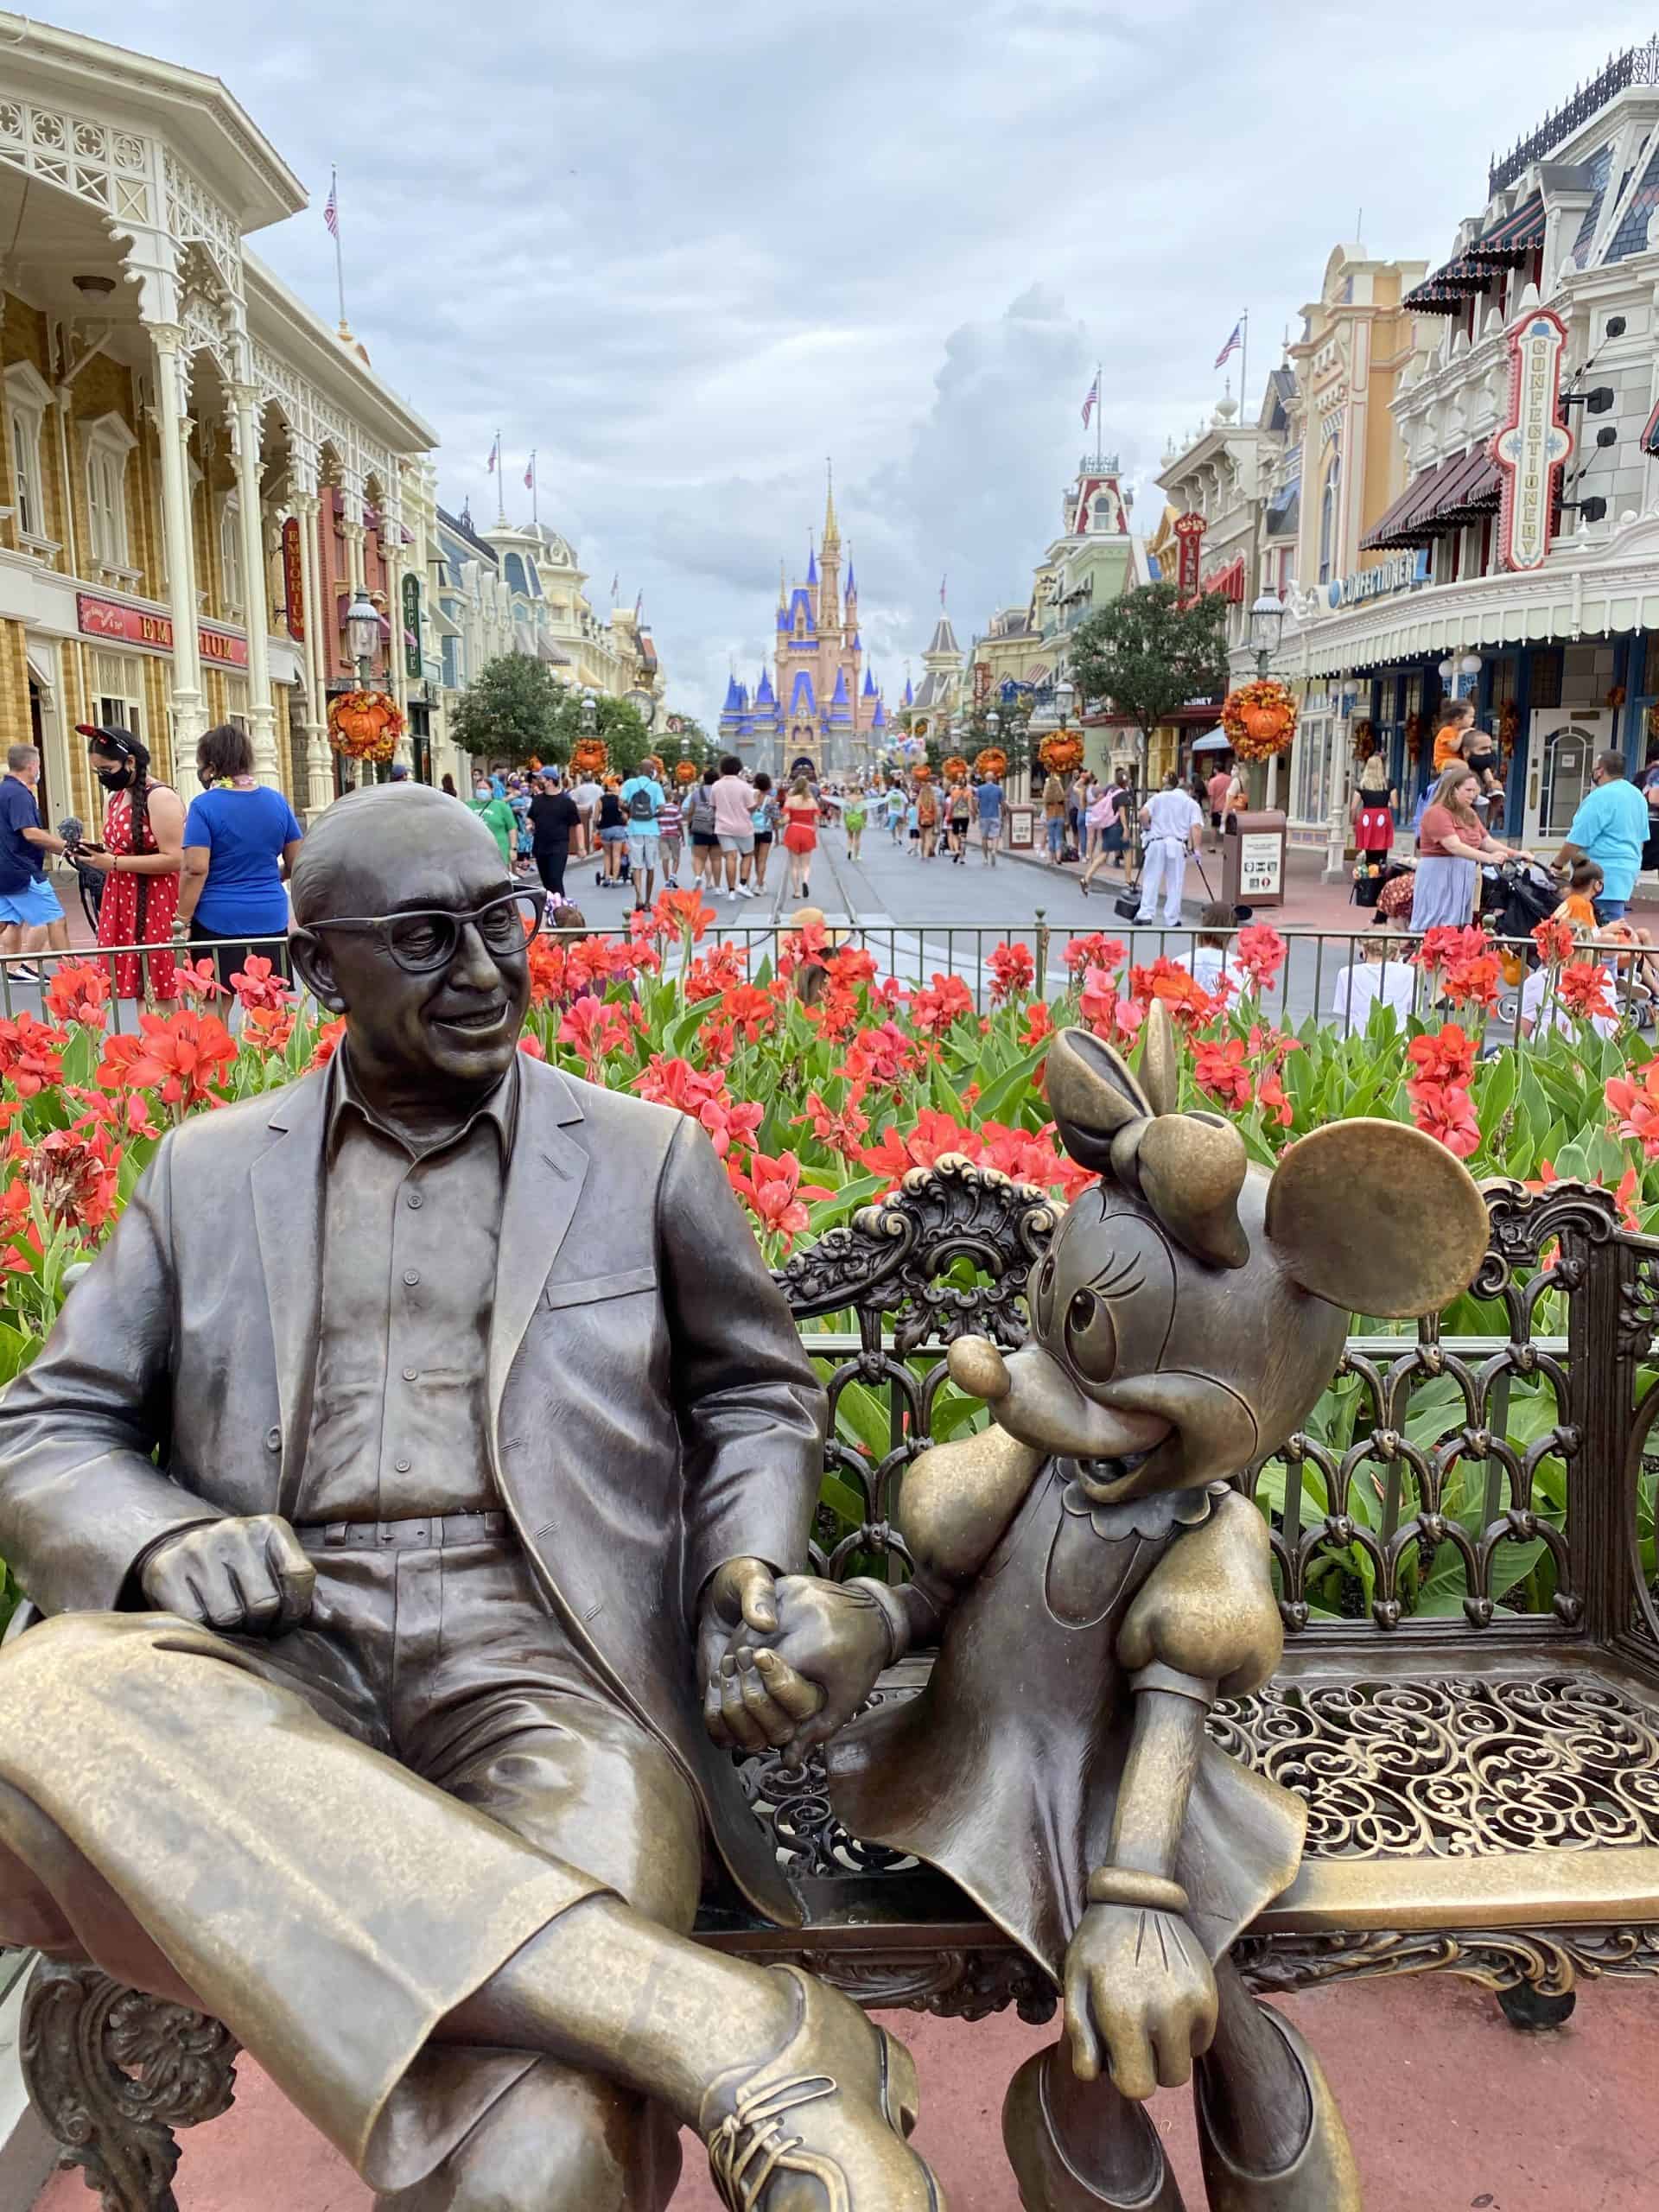 Roy and Minnie Statue